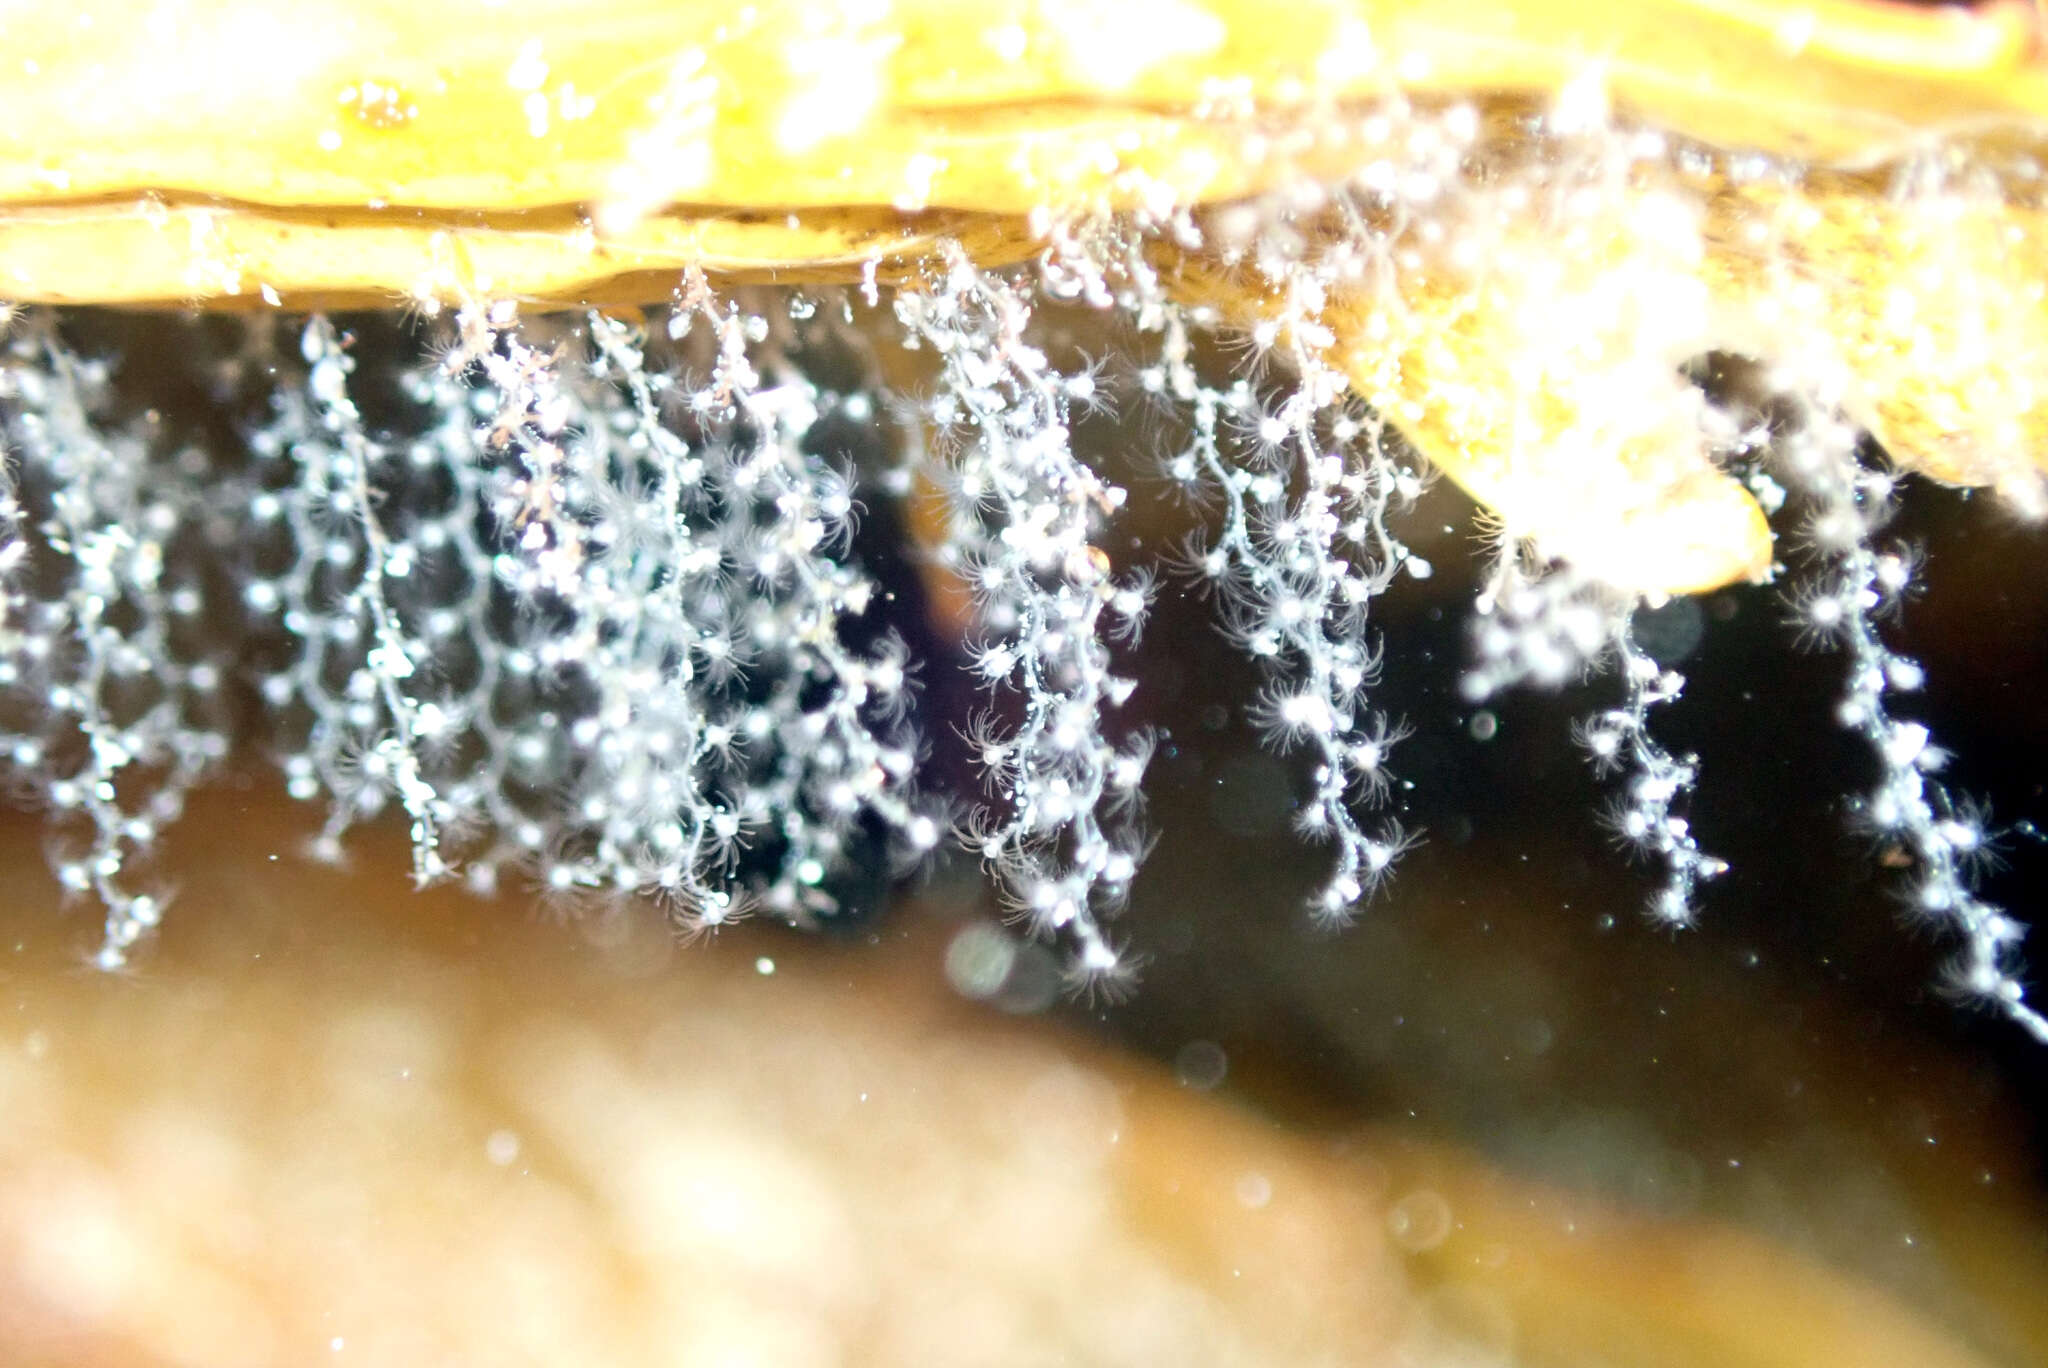 Image of bell hydroid